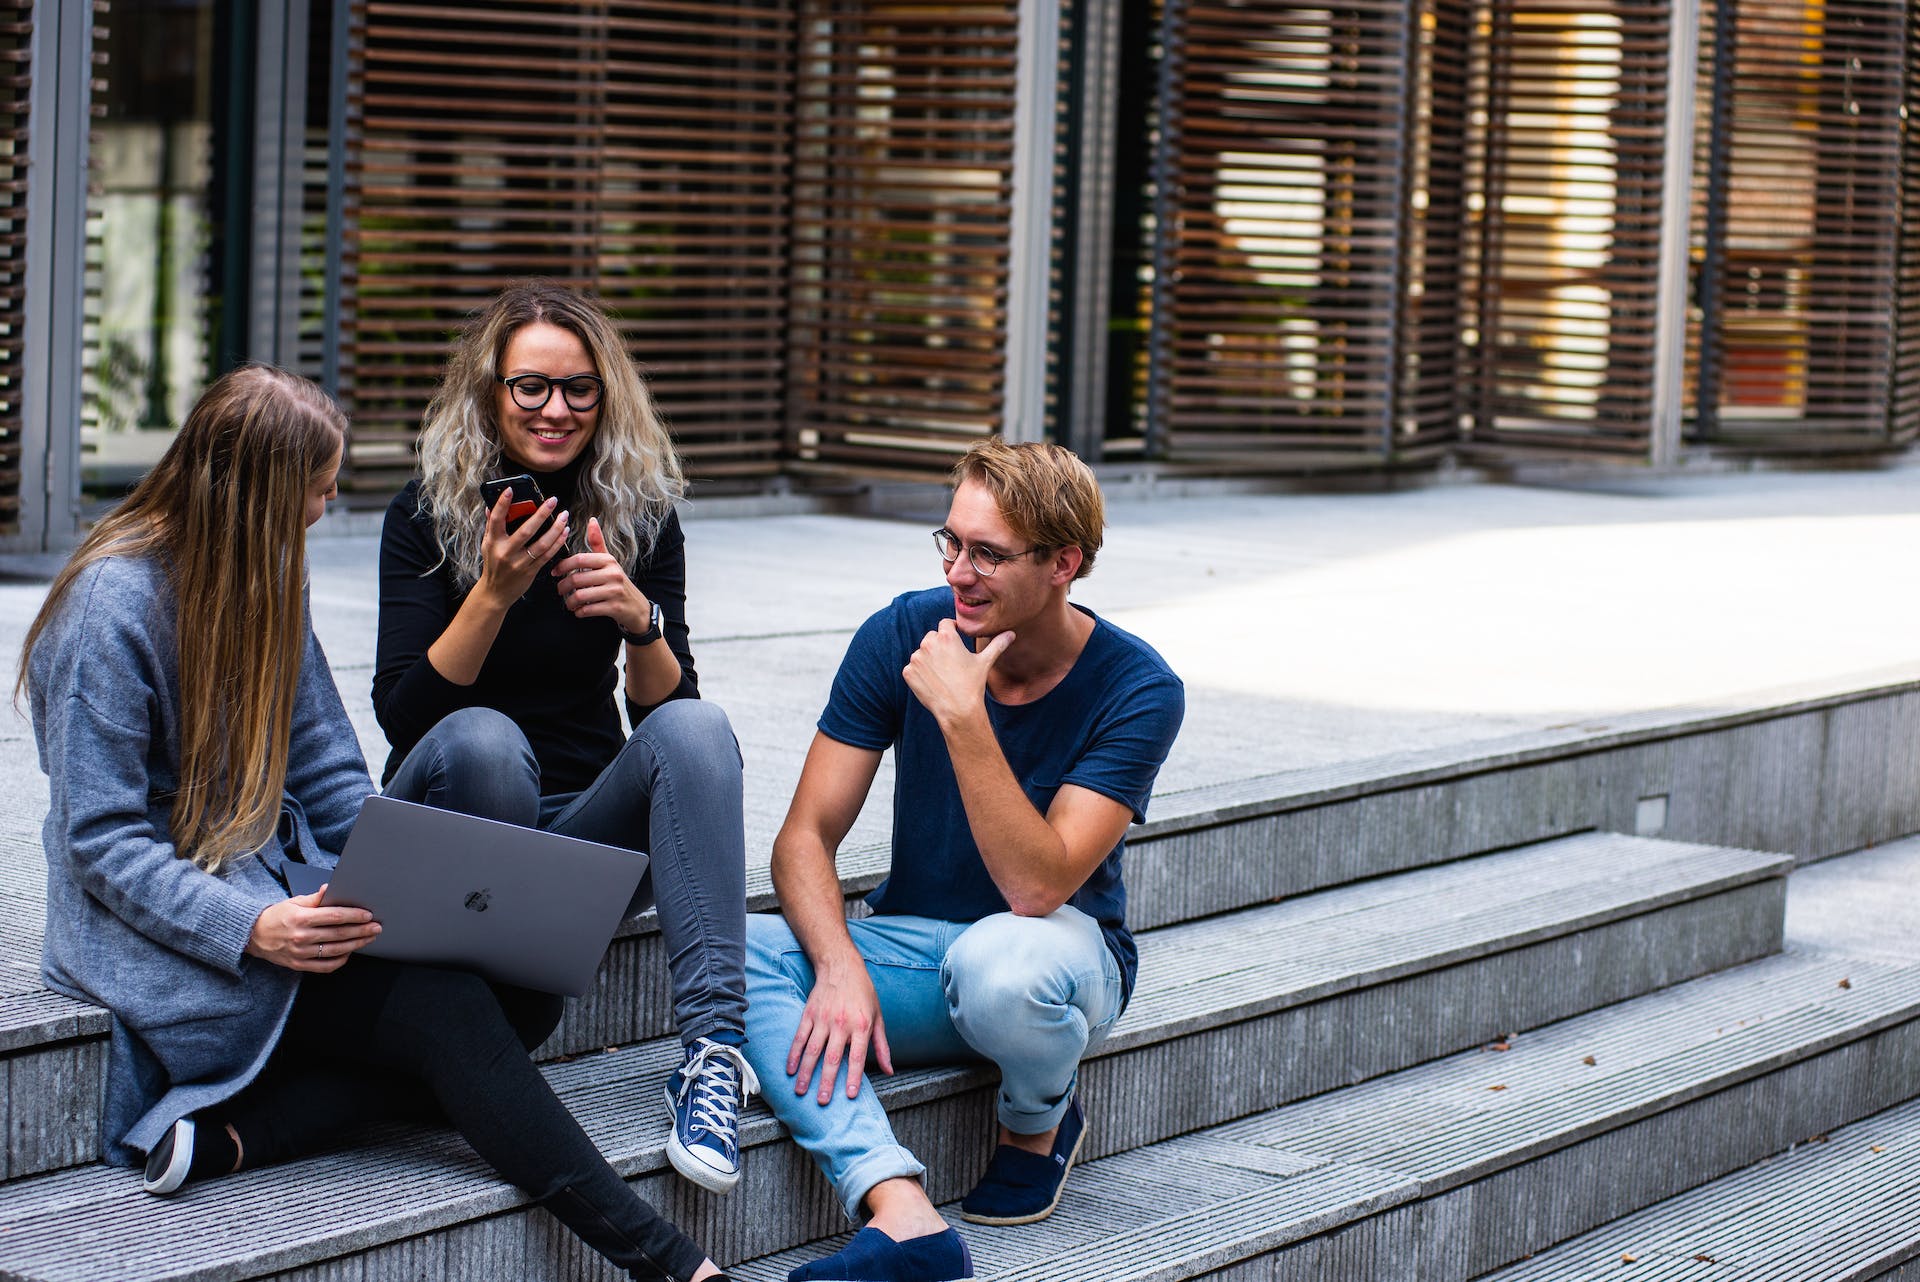 A group of friends talking to each other | Source: Pexels